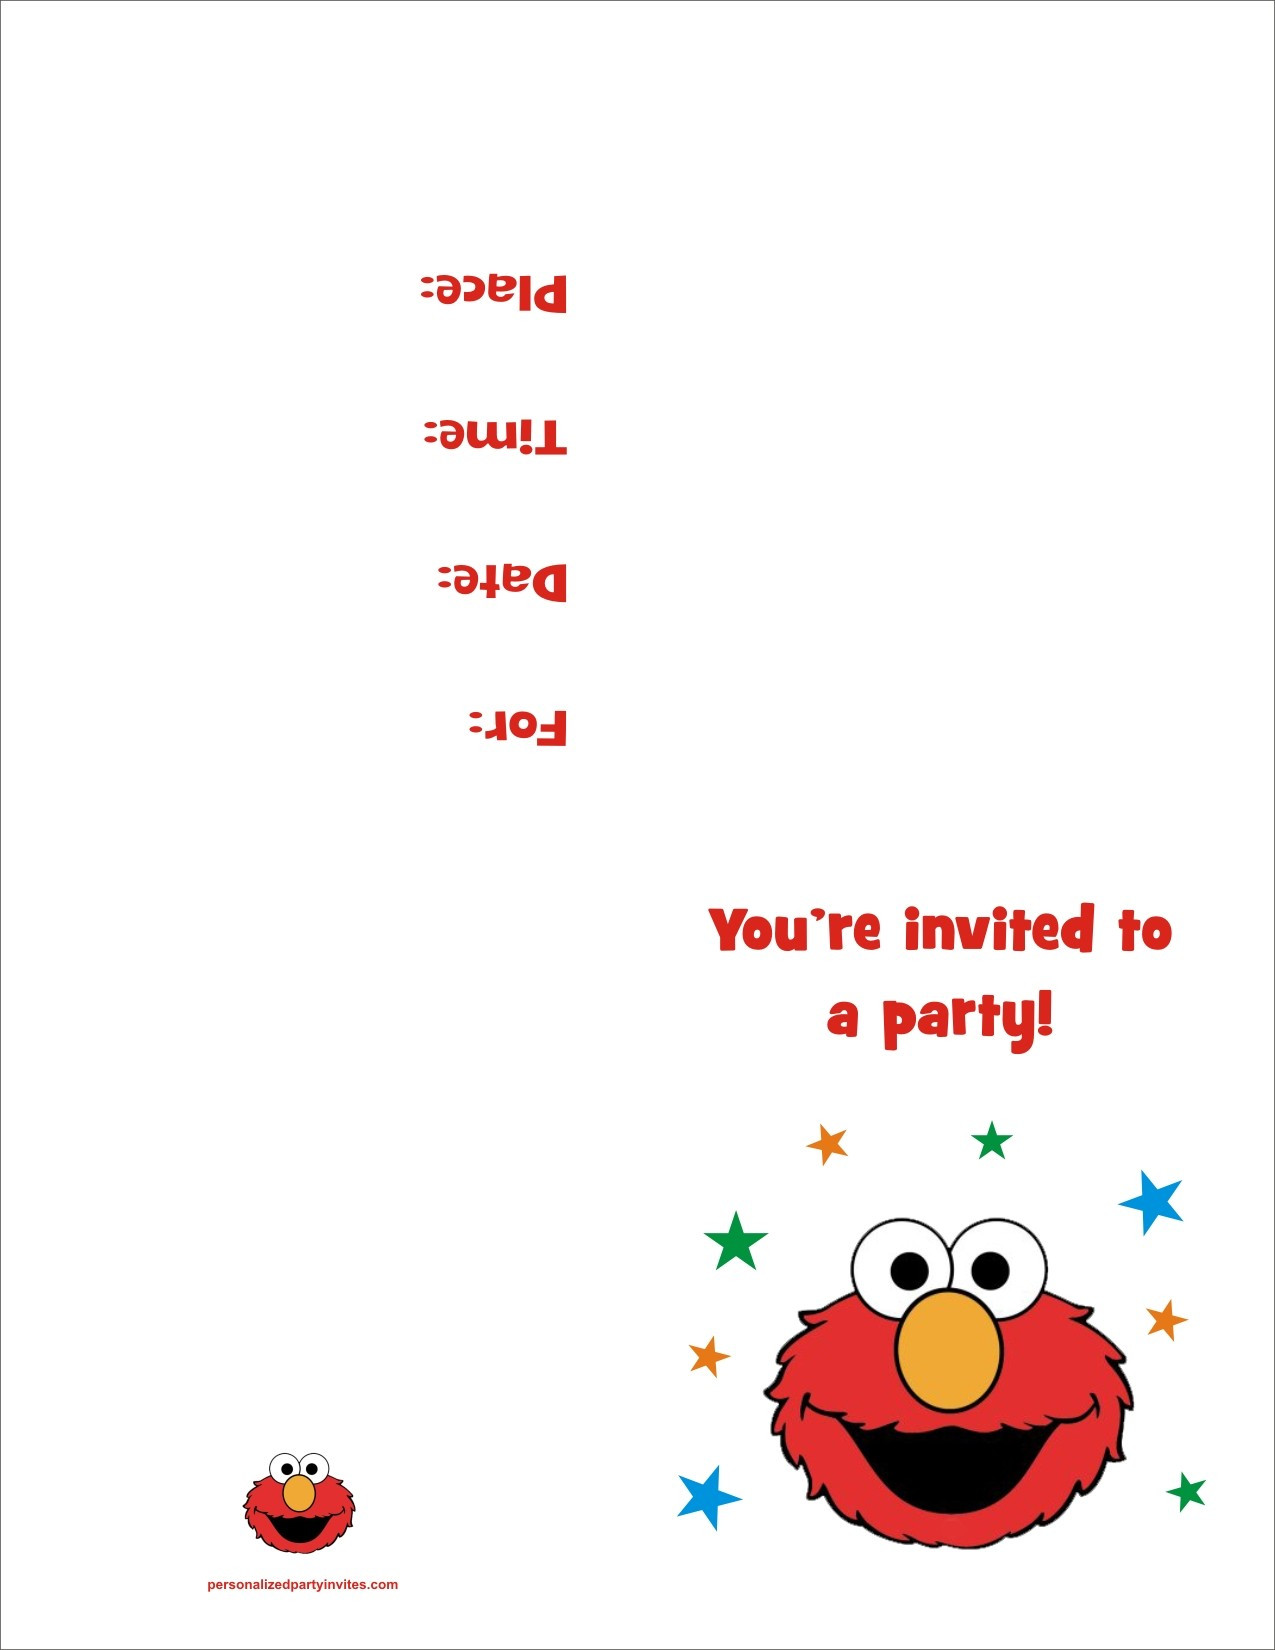 Free Birthday Party Printables Decorations
 Elmo FREE Printable Birthday Party Invitation Personalized